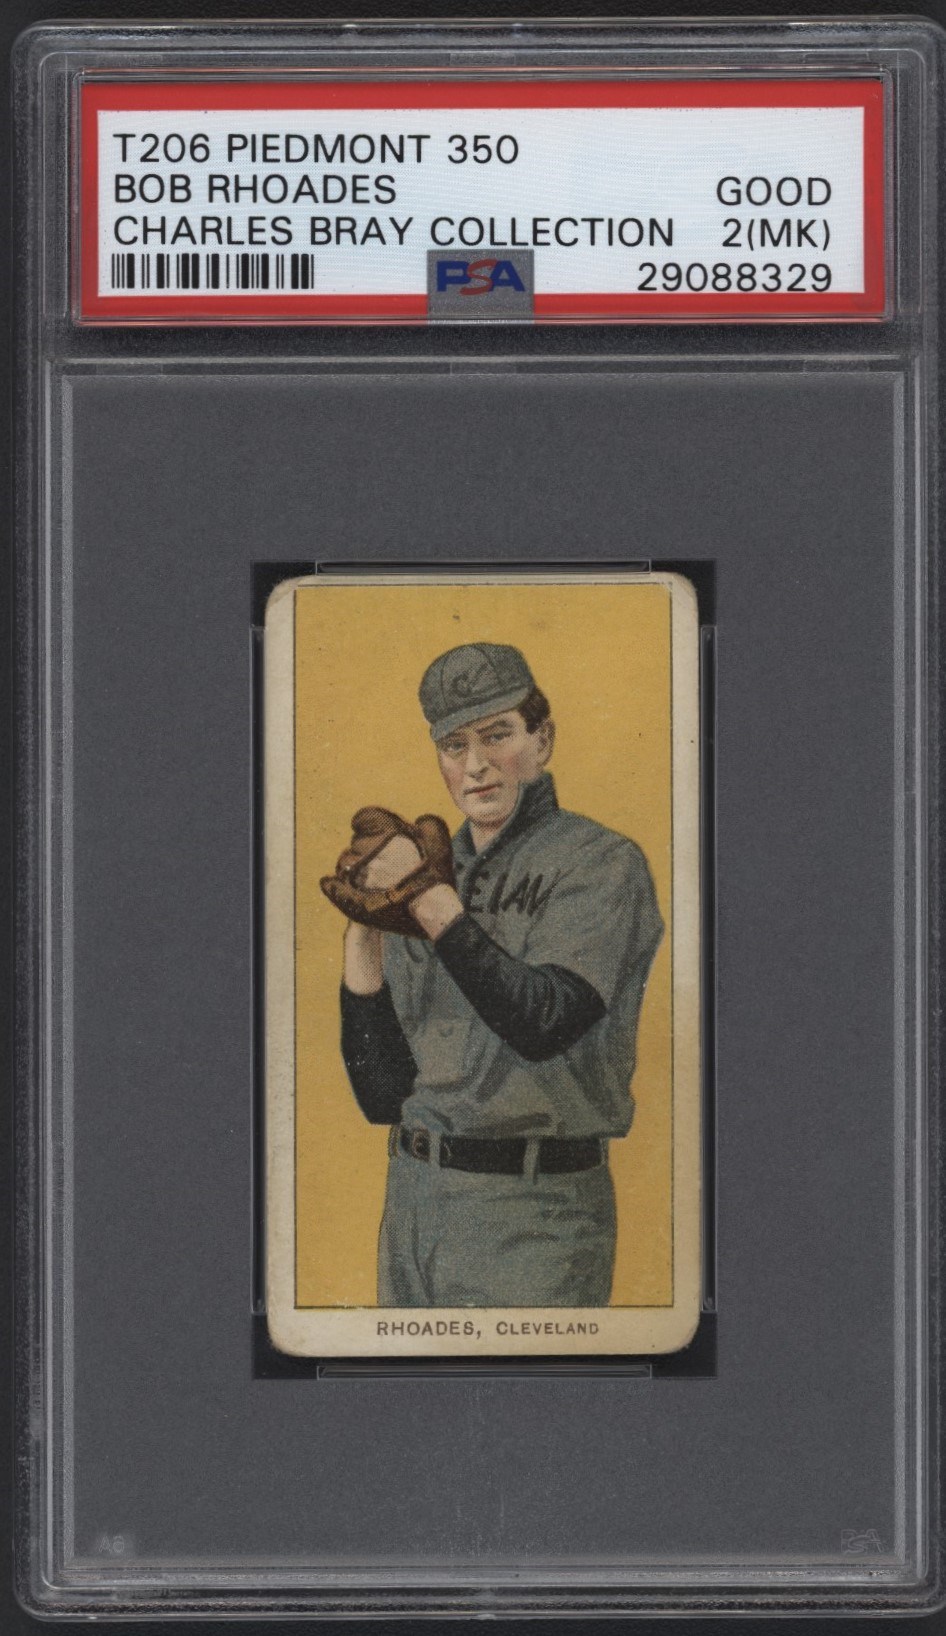 Baseball and Trading Cards - T206 Piedmont 350 Bob Rhodes PSA 2 From the Charles Bray Collection